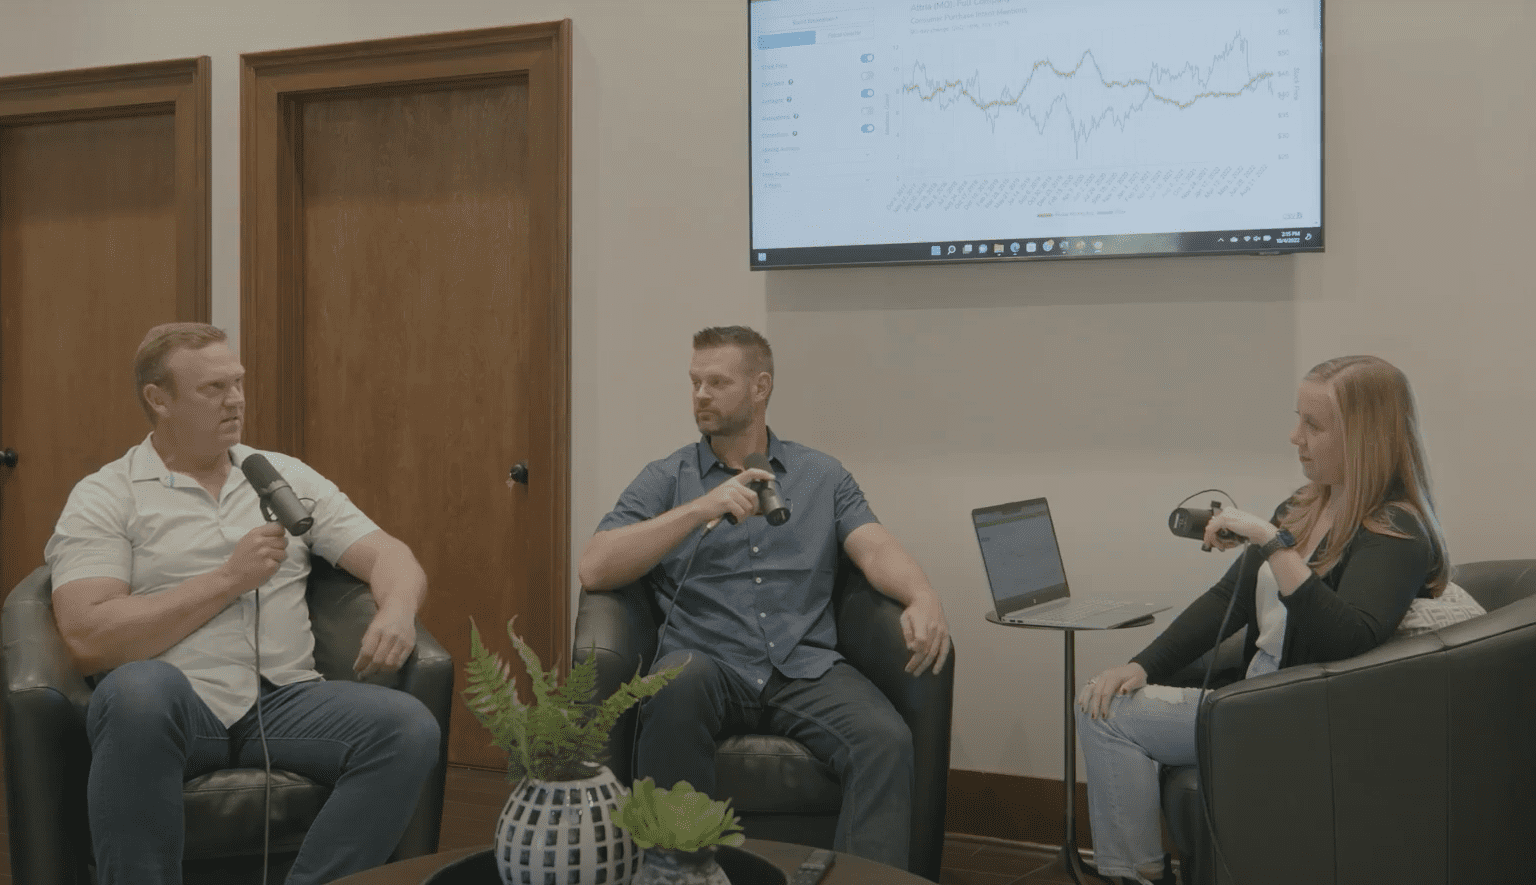 Likefolio podcast with Andy, Landon, and Megan